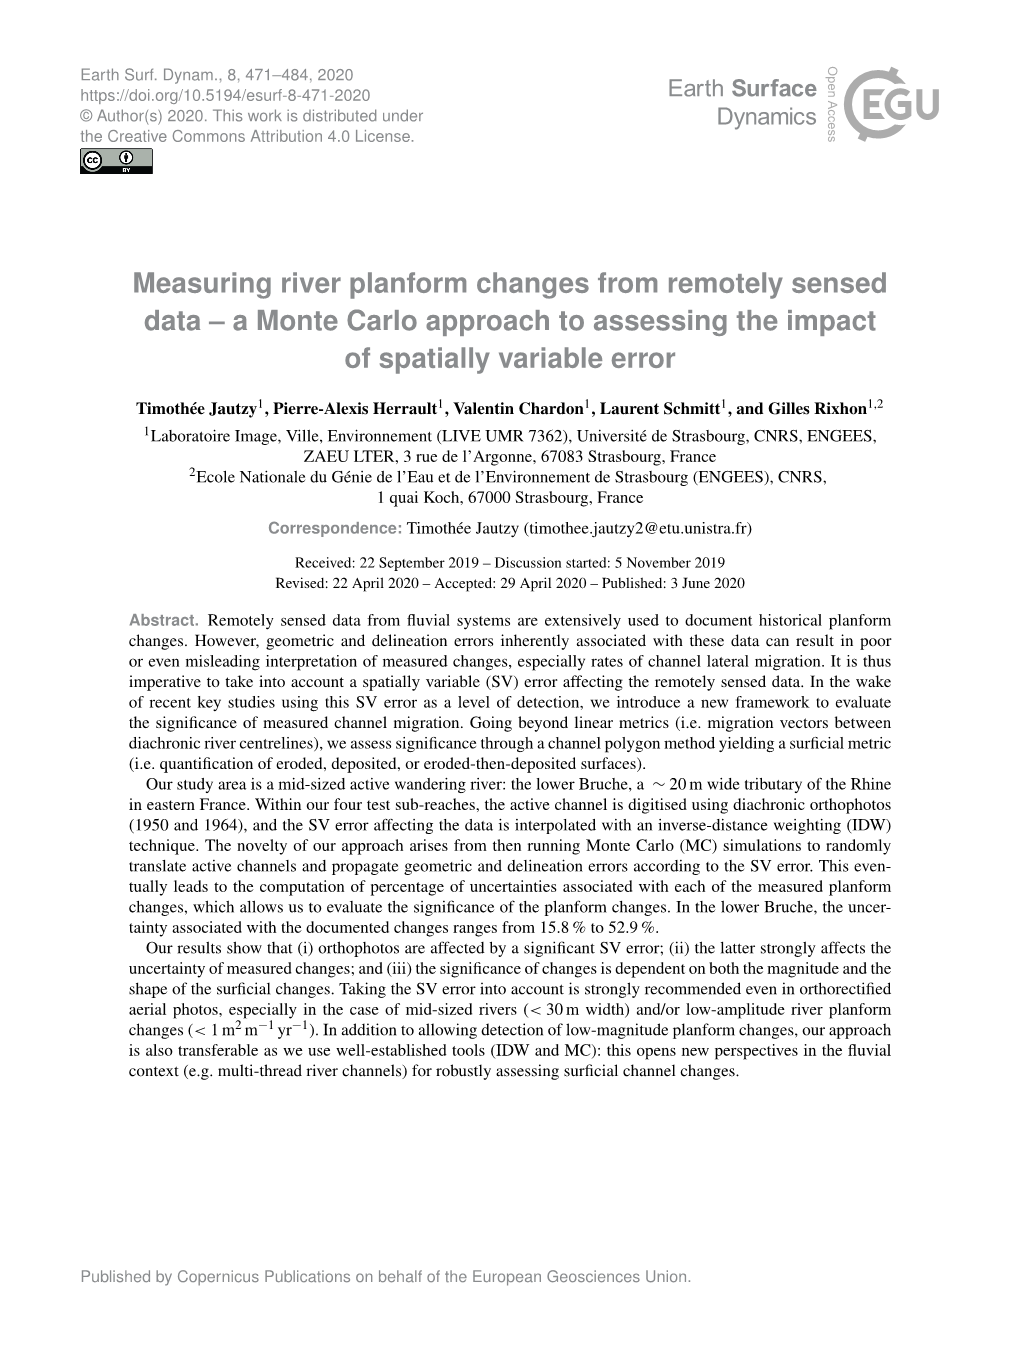 Measuring River Planform Changes from Remotely Sensed Data – a Monte Carlo Approach to Assessing the Impact of Spatially Variable Error